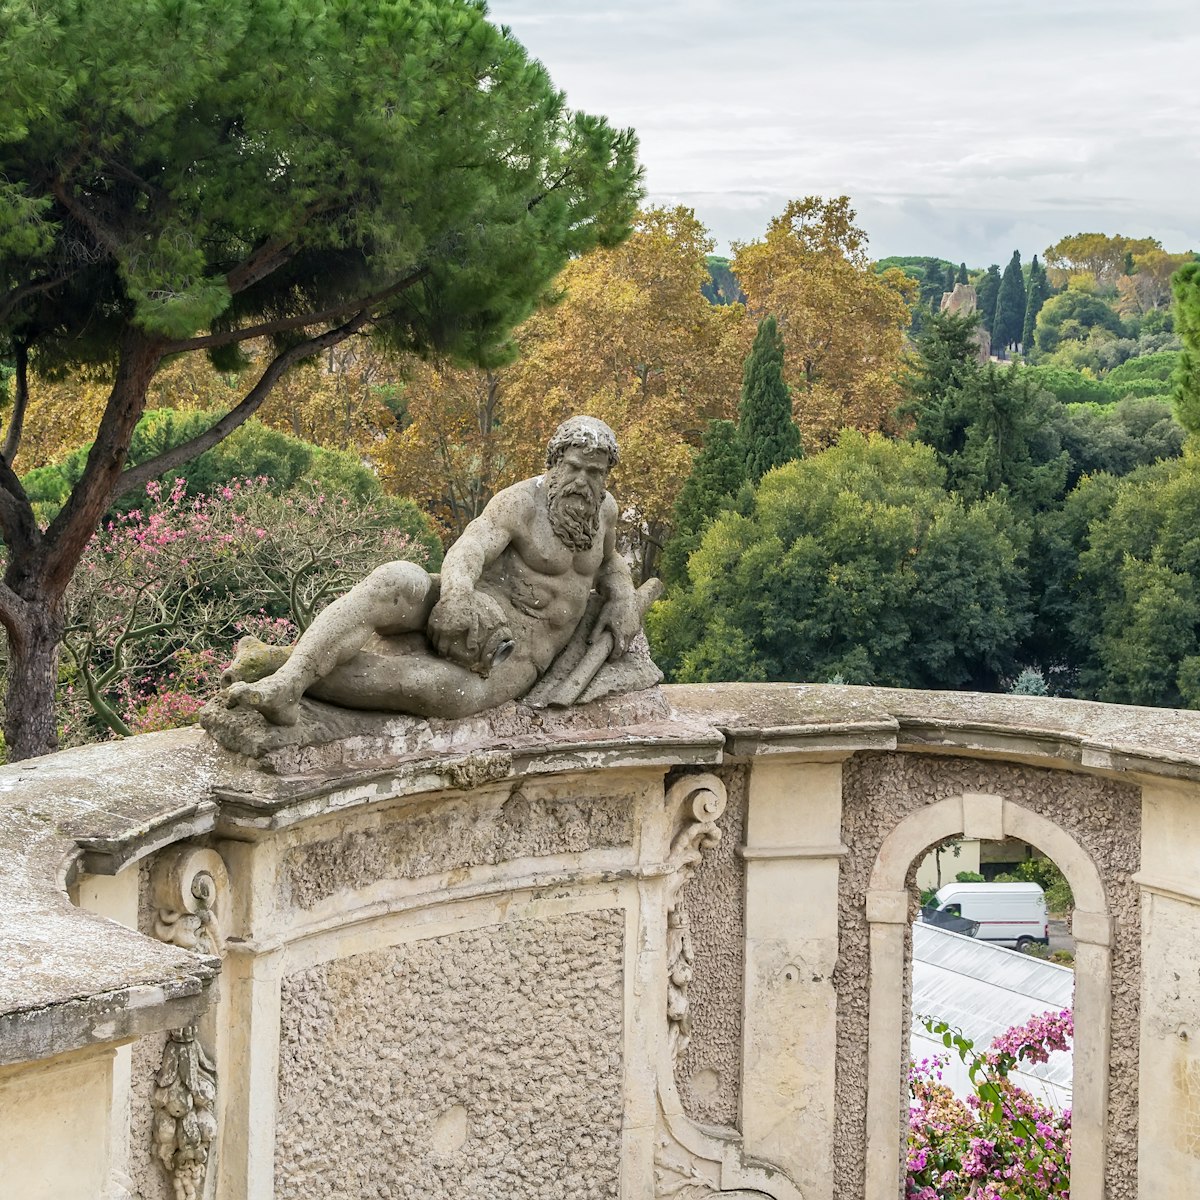 Statue in garden of Villa Celimontana (previously known as Villa Mattei) on the Caelian Hill in Rome, best known for its gardens.